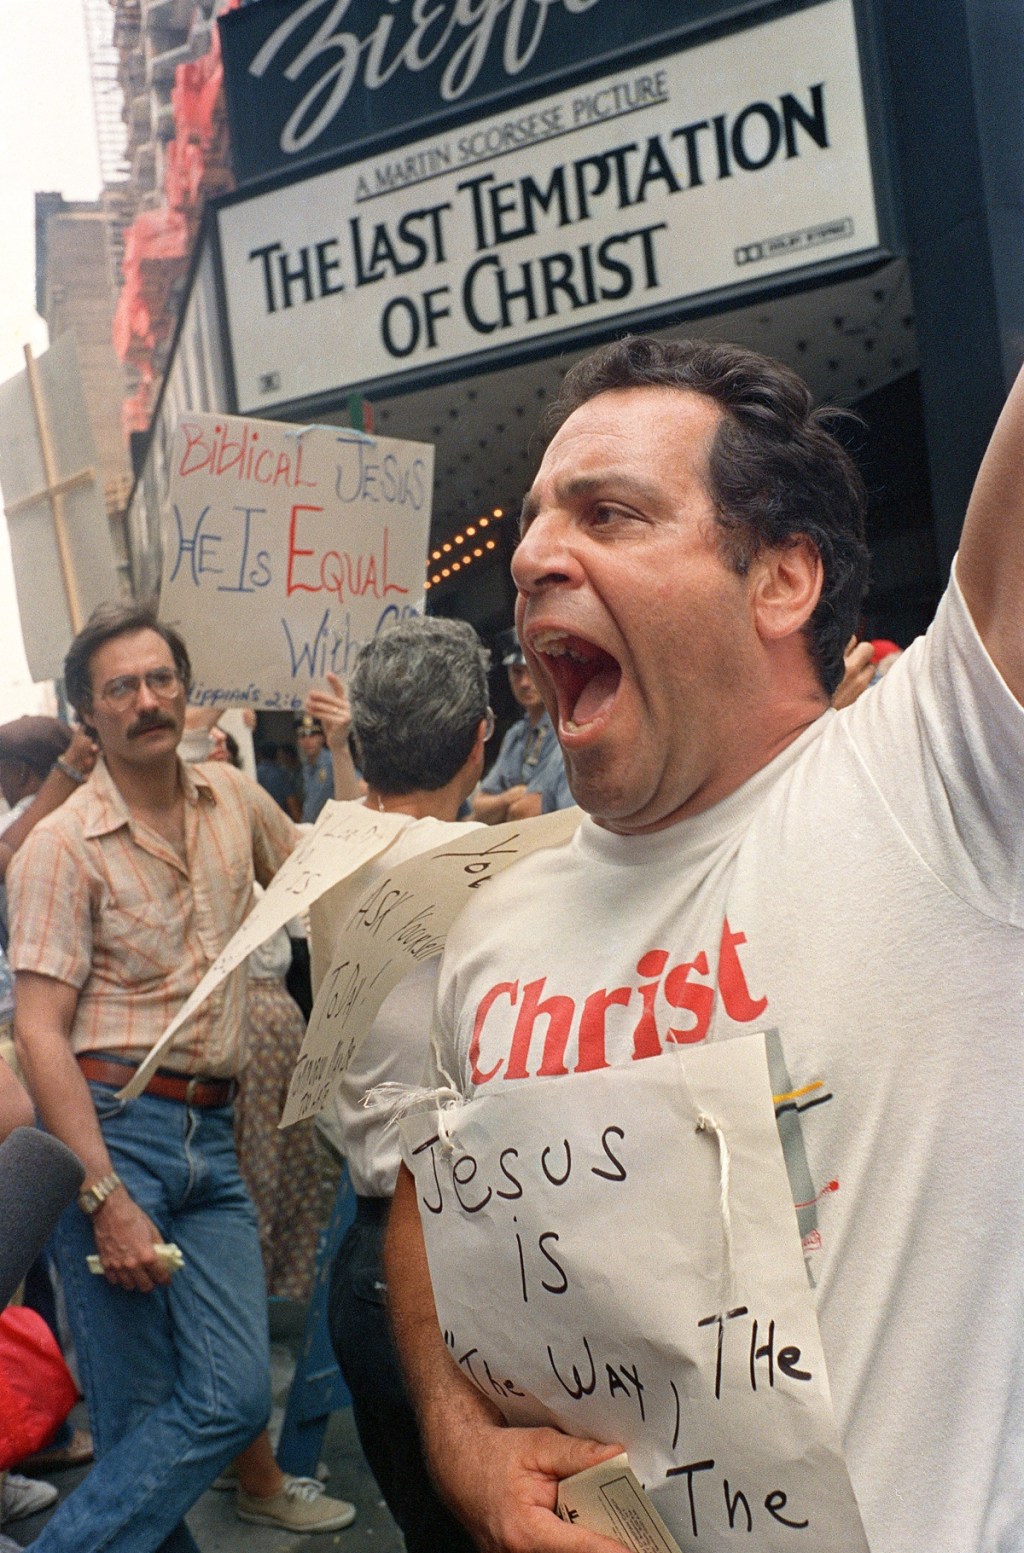 Protestors demonstrate against the showing of the controversial Martin Scorsese's film "The Last Temptation of Christ"